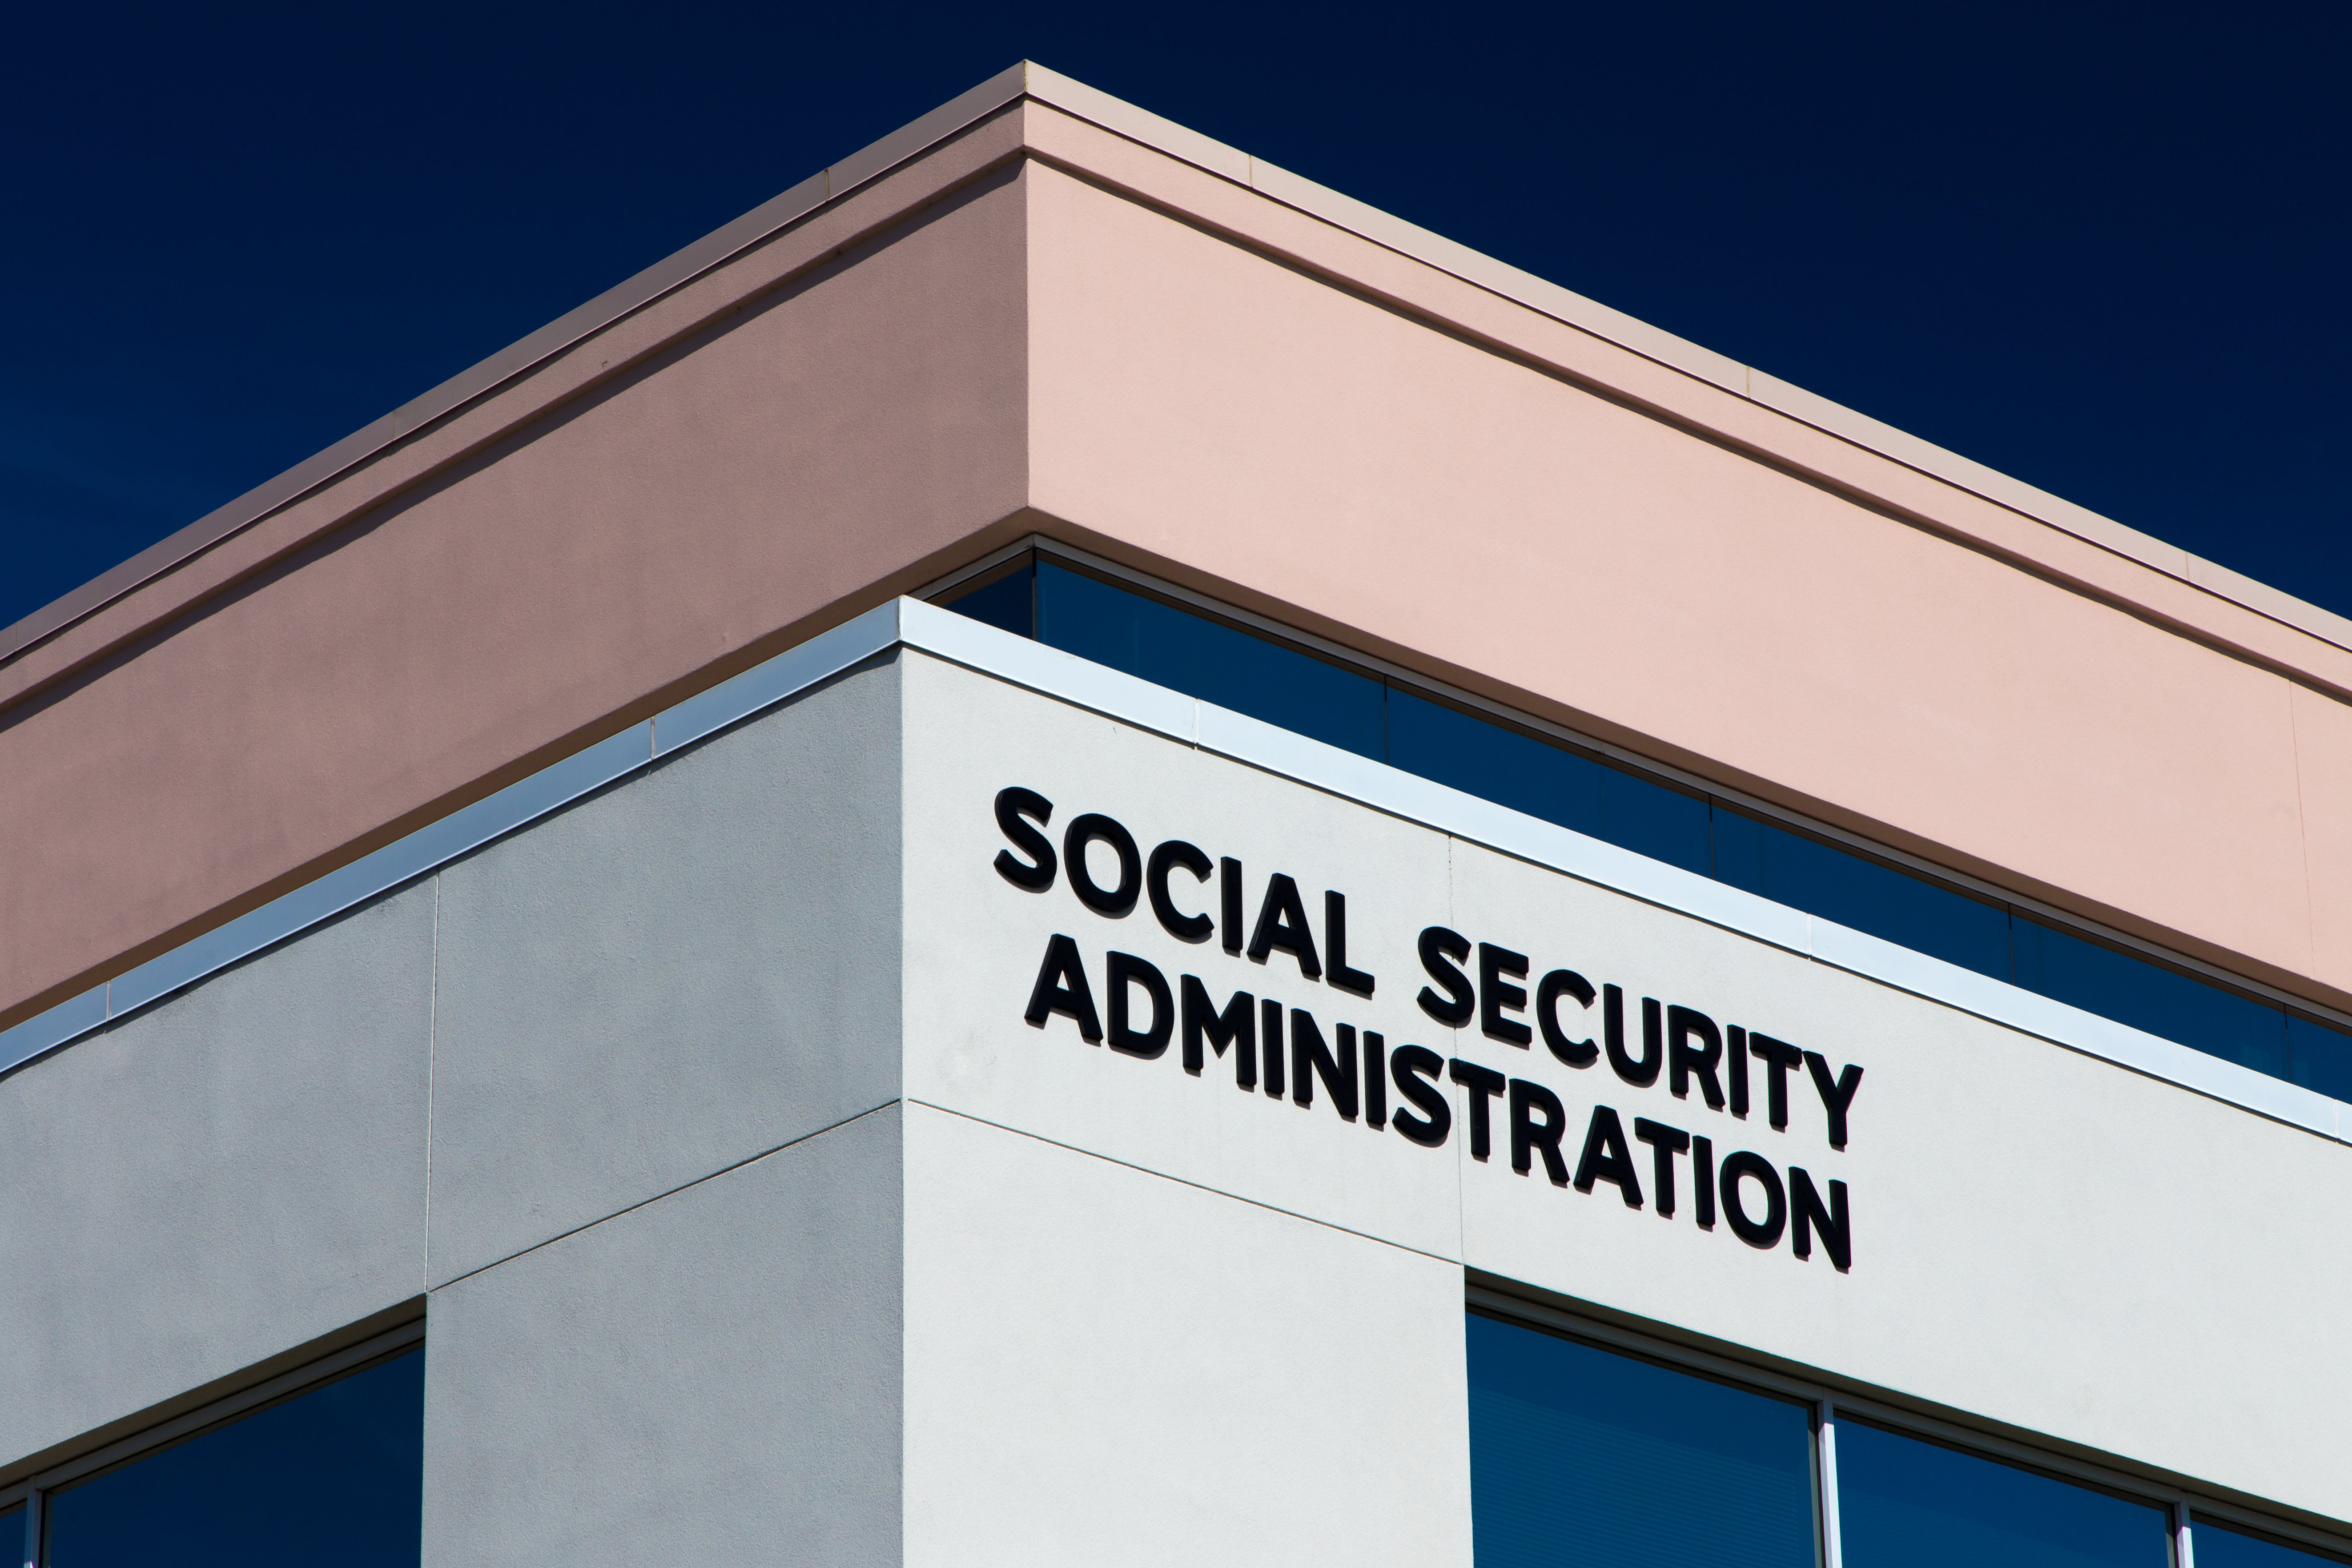 Image of Everything you need to know about the safety net that is Social Security, from when it started and how it is collected to who is eligible to get it.